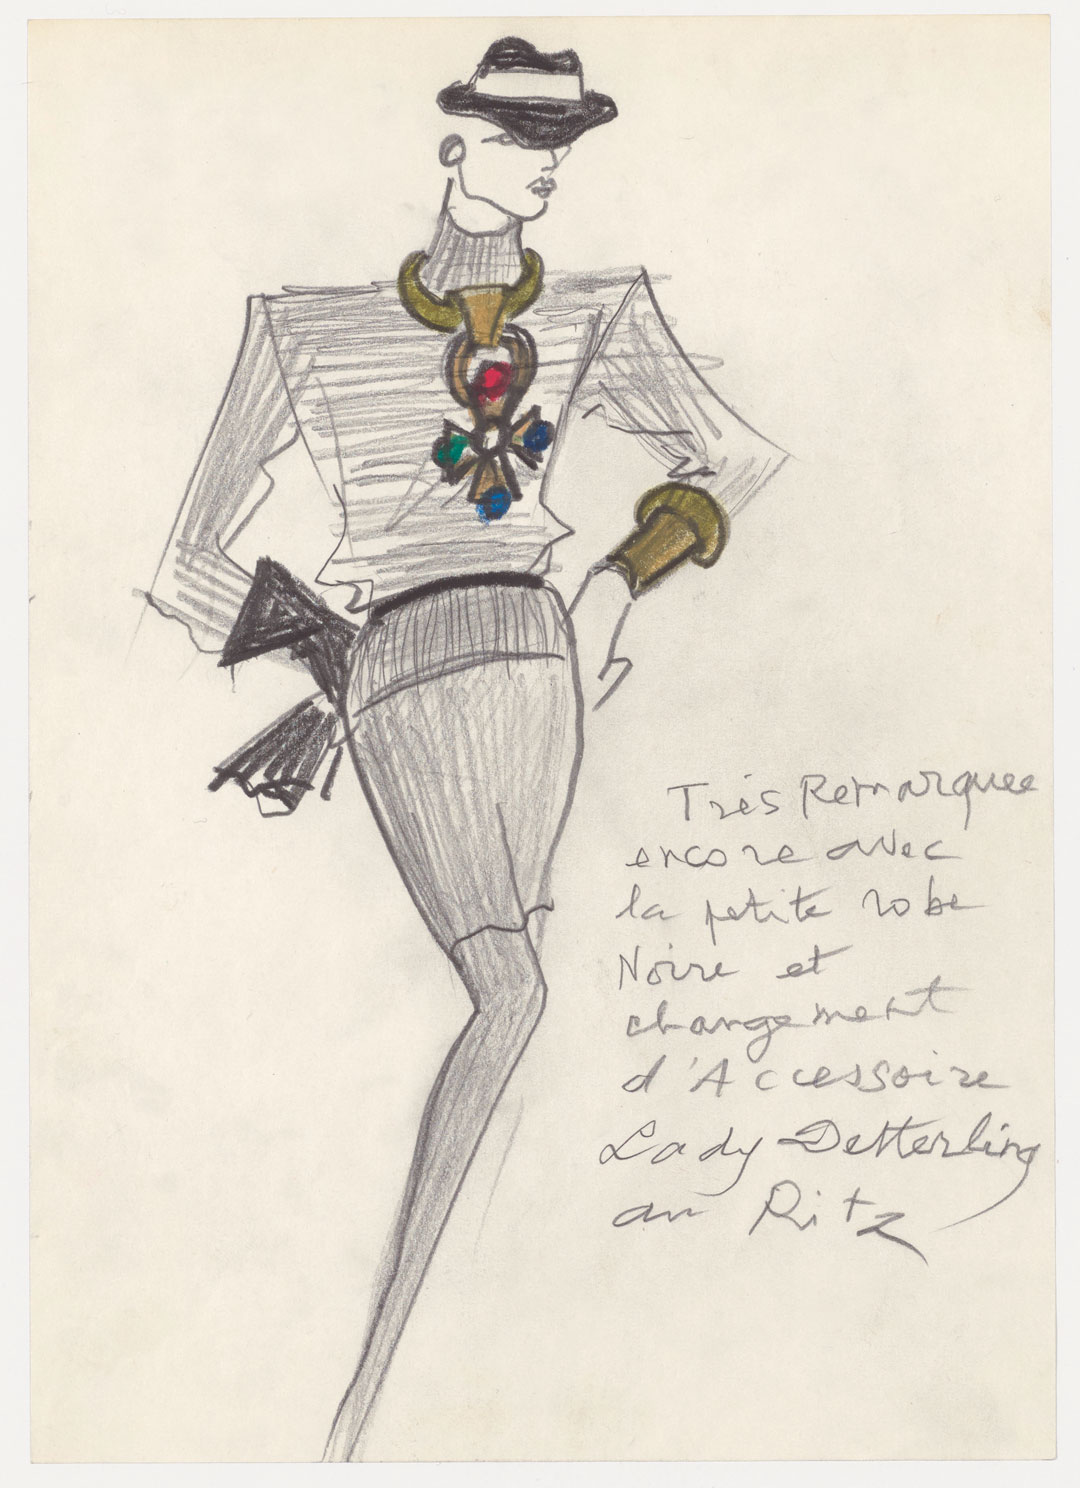 Original sketch for a day outfit accessorized with a man’s hat, a large pectoral with a Maltese cross and gloves. The handwritten note reads: ‘Much admired again with the little black dress and a change of accessories: Lady Detterling at the Ritz’, Autumn/Winter 1988. © Fondation Pierre Bergé – Yves Saint Laurent, Paris/All Rights Reserved